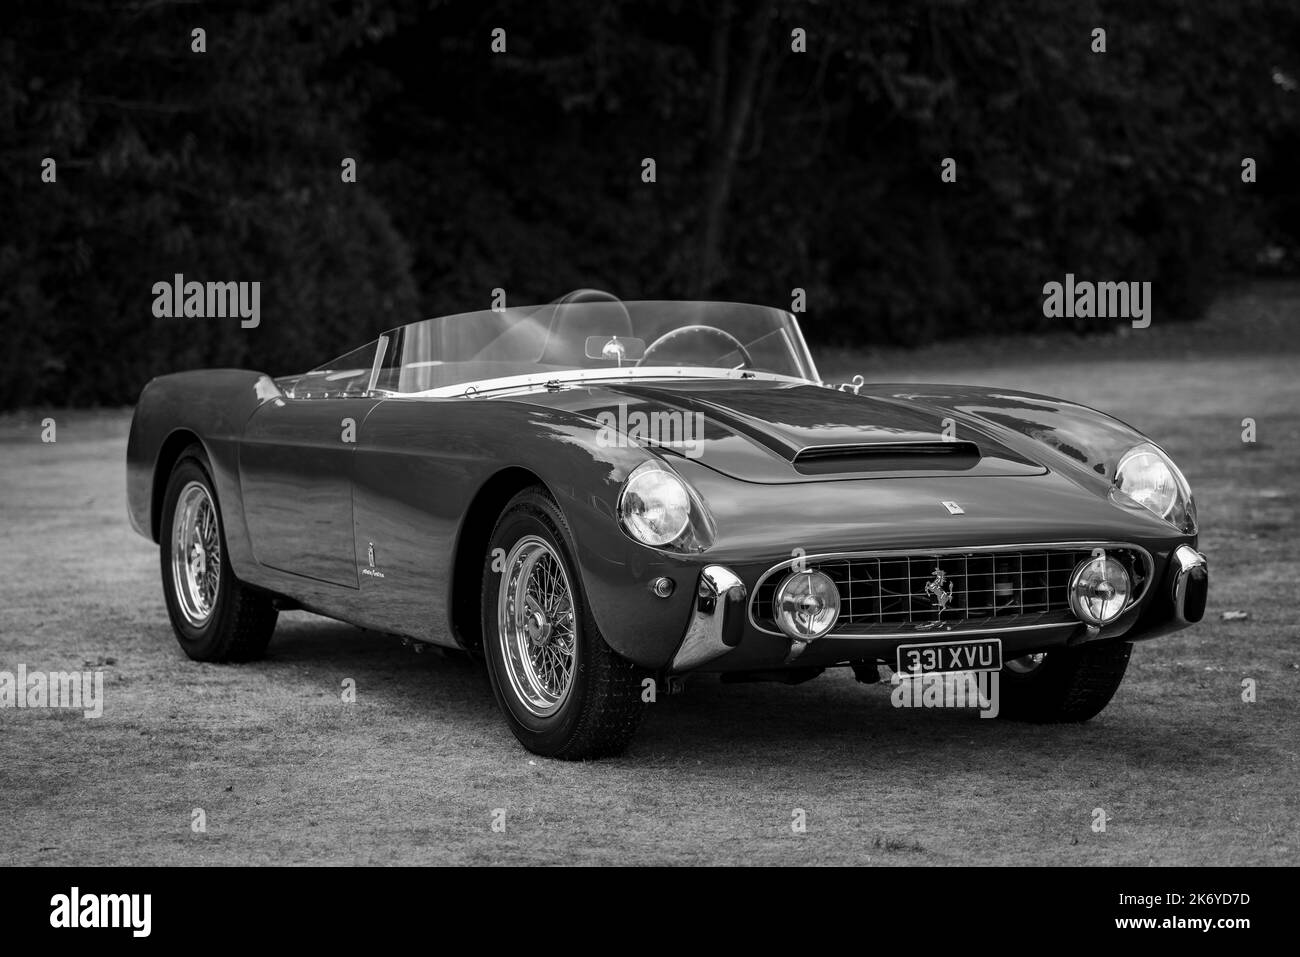 1957 Ferrari 250 GT Series I Café Racer ‘331 XVU’ on display at the Concours d’Elégance motor show held at Blenheim Palace Stock Photo